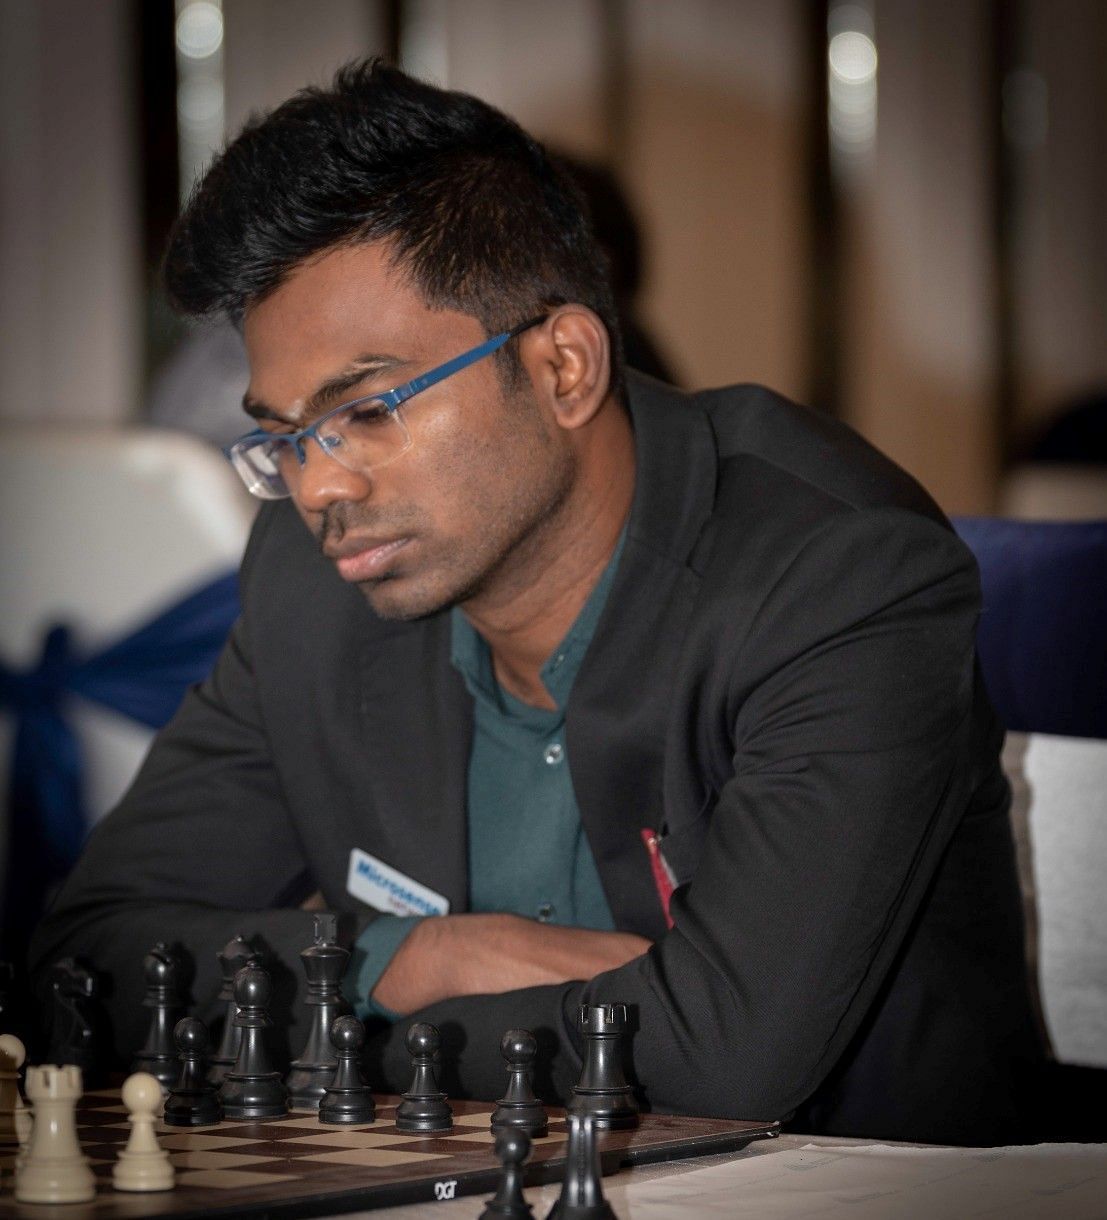 SP Sethuraman beat Pavel Ponkratov of Russia (6) in the ninth round in New Delhi on Monday. (Pic credit: AICF)